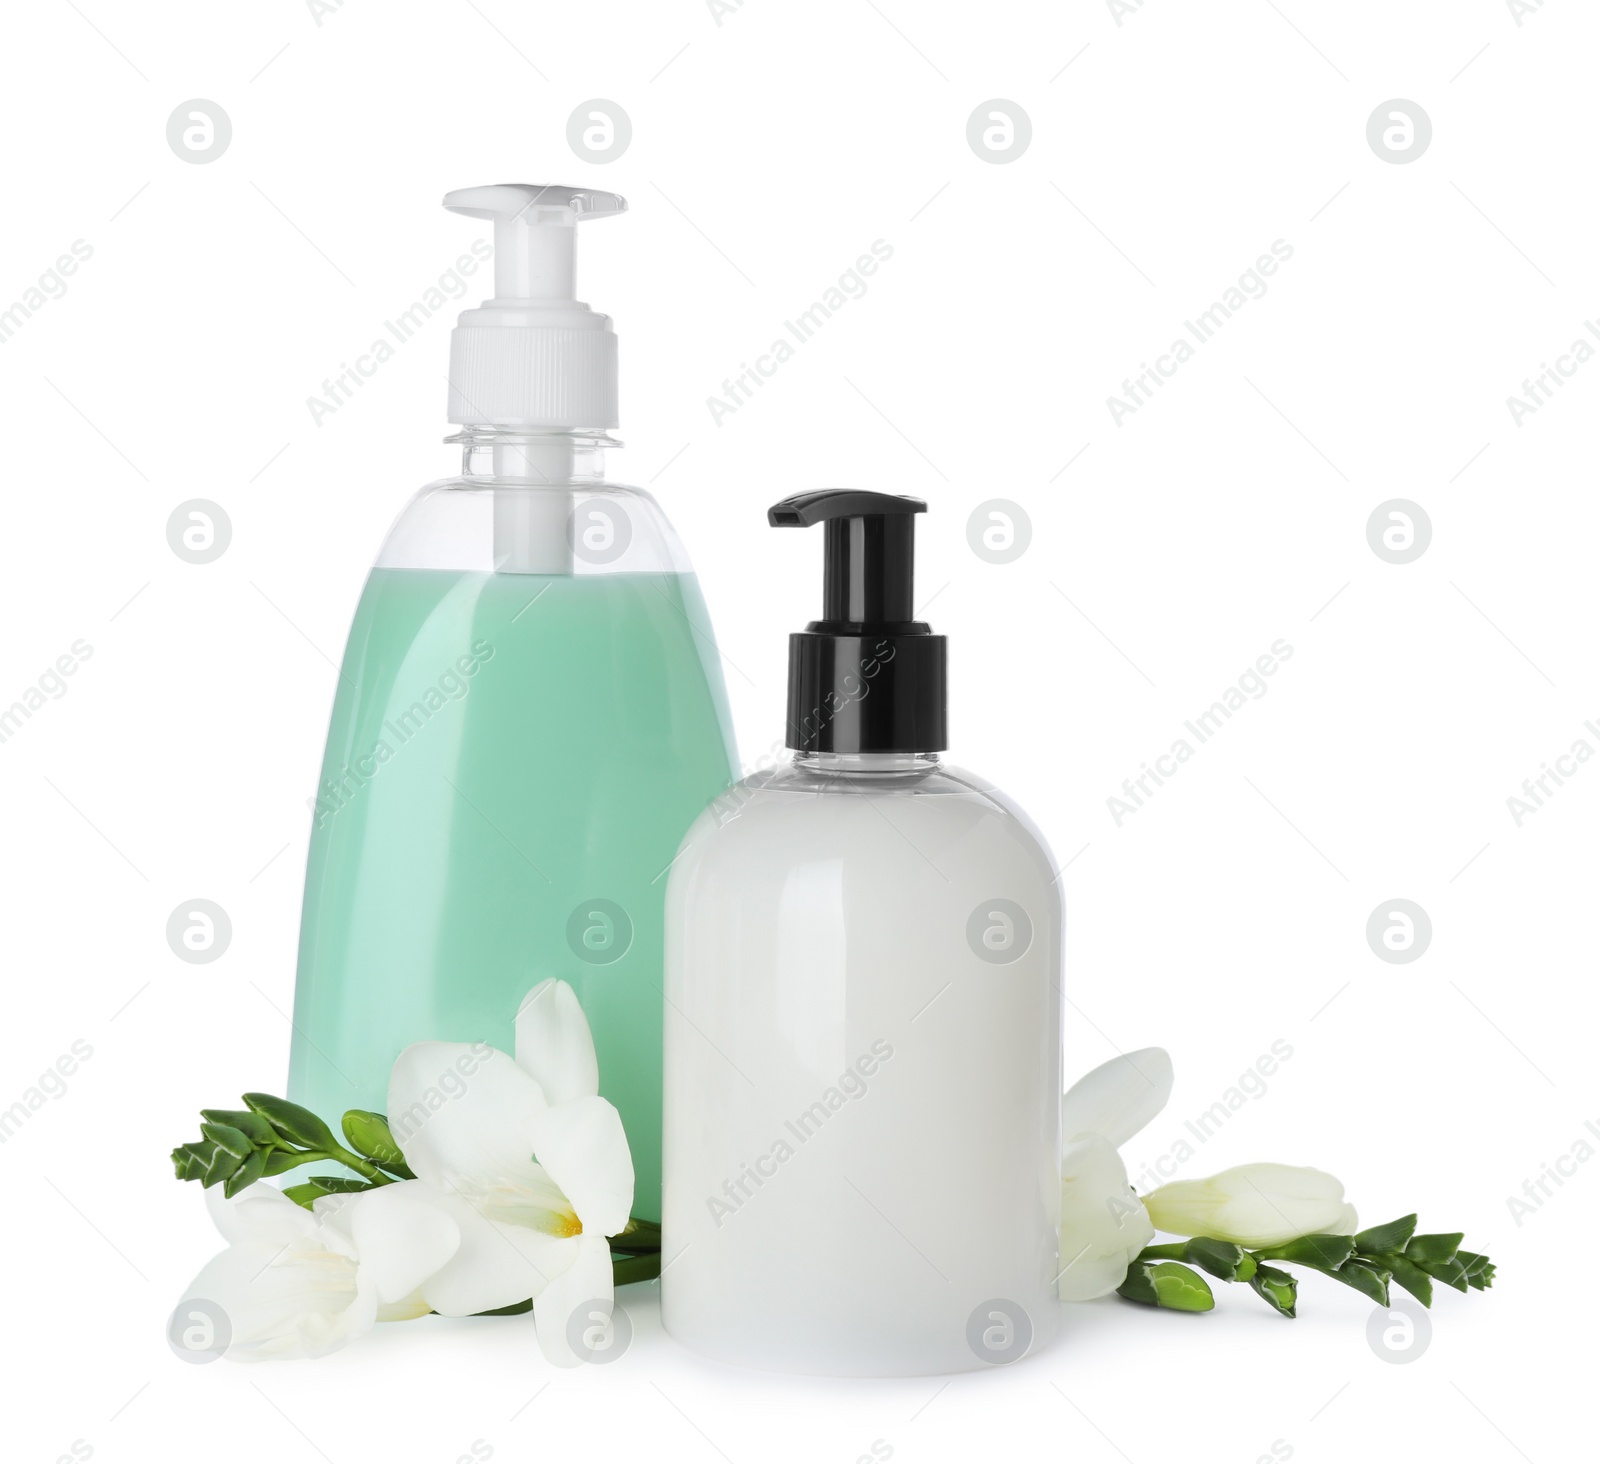 Photo of Dispensers of liquid soap and freesia flowers on white background